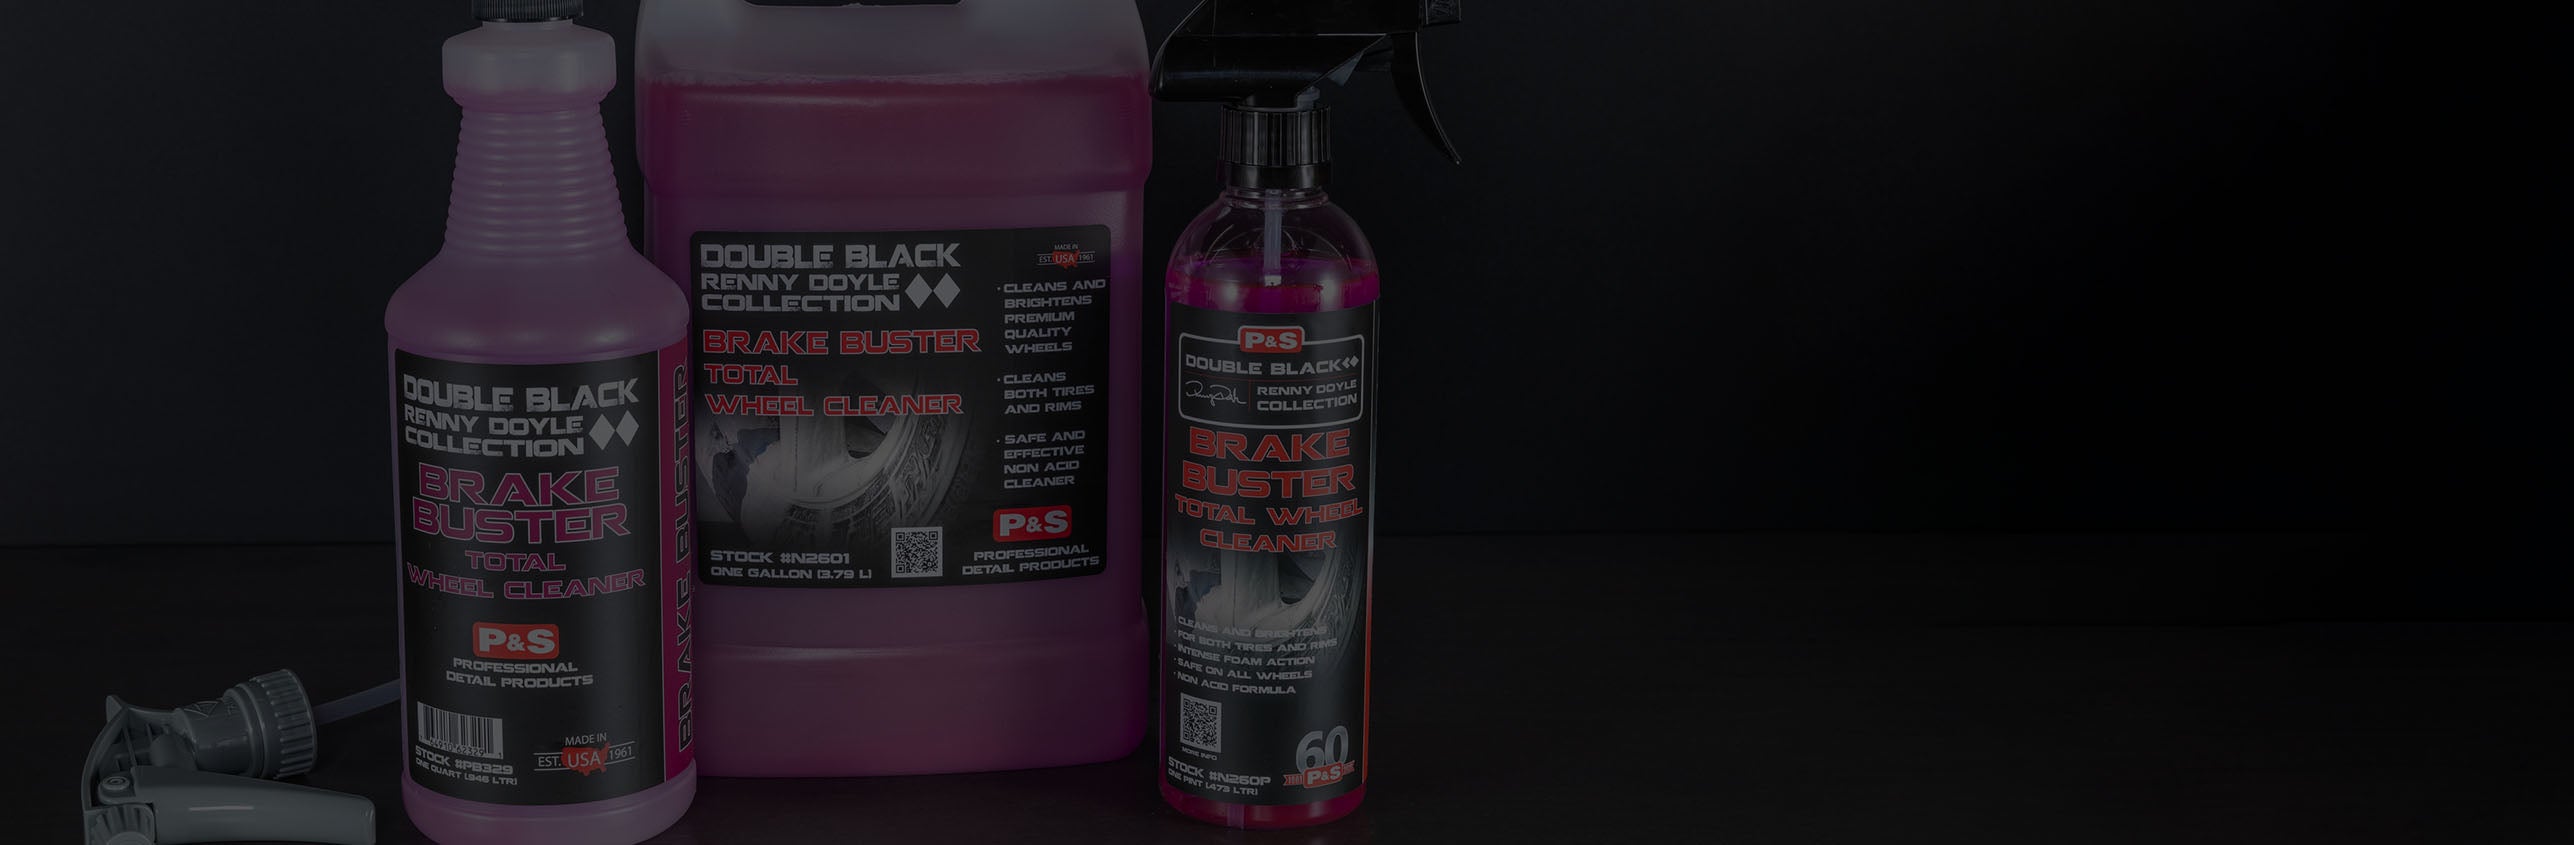 P & S Double Black Xpress Interior Cleaner Vs. Adam's Polishes and